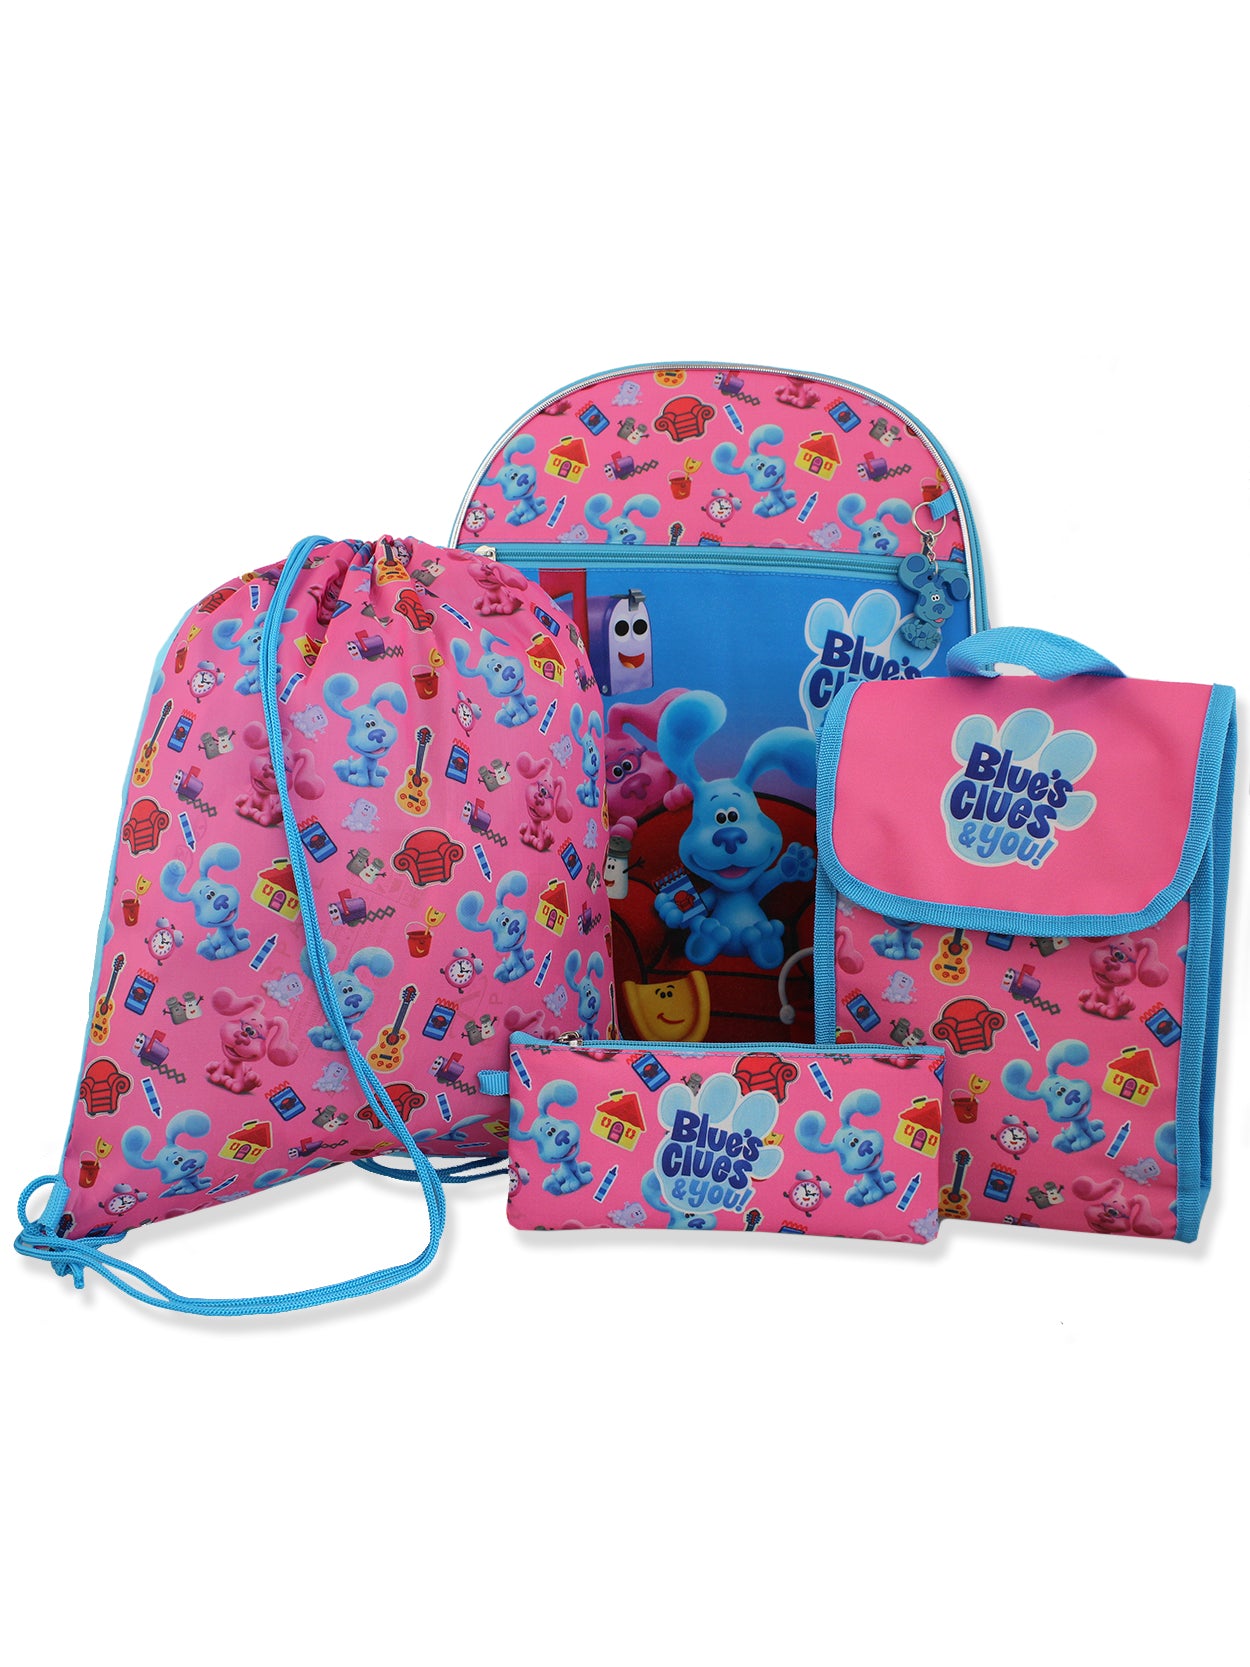 Lol Surprise 5 Piece Backpack & Lunch Box Set, Multi